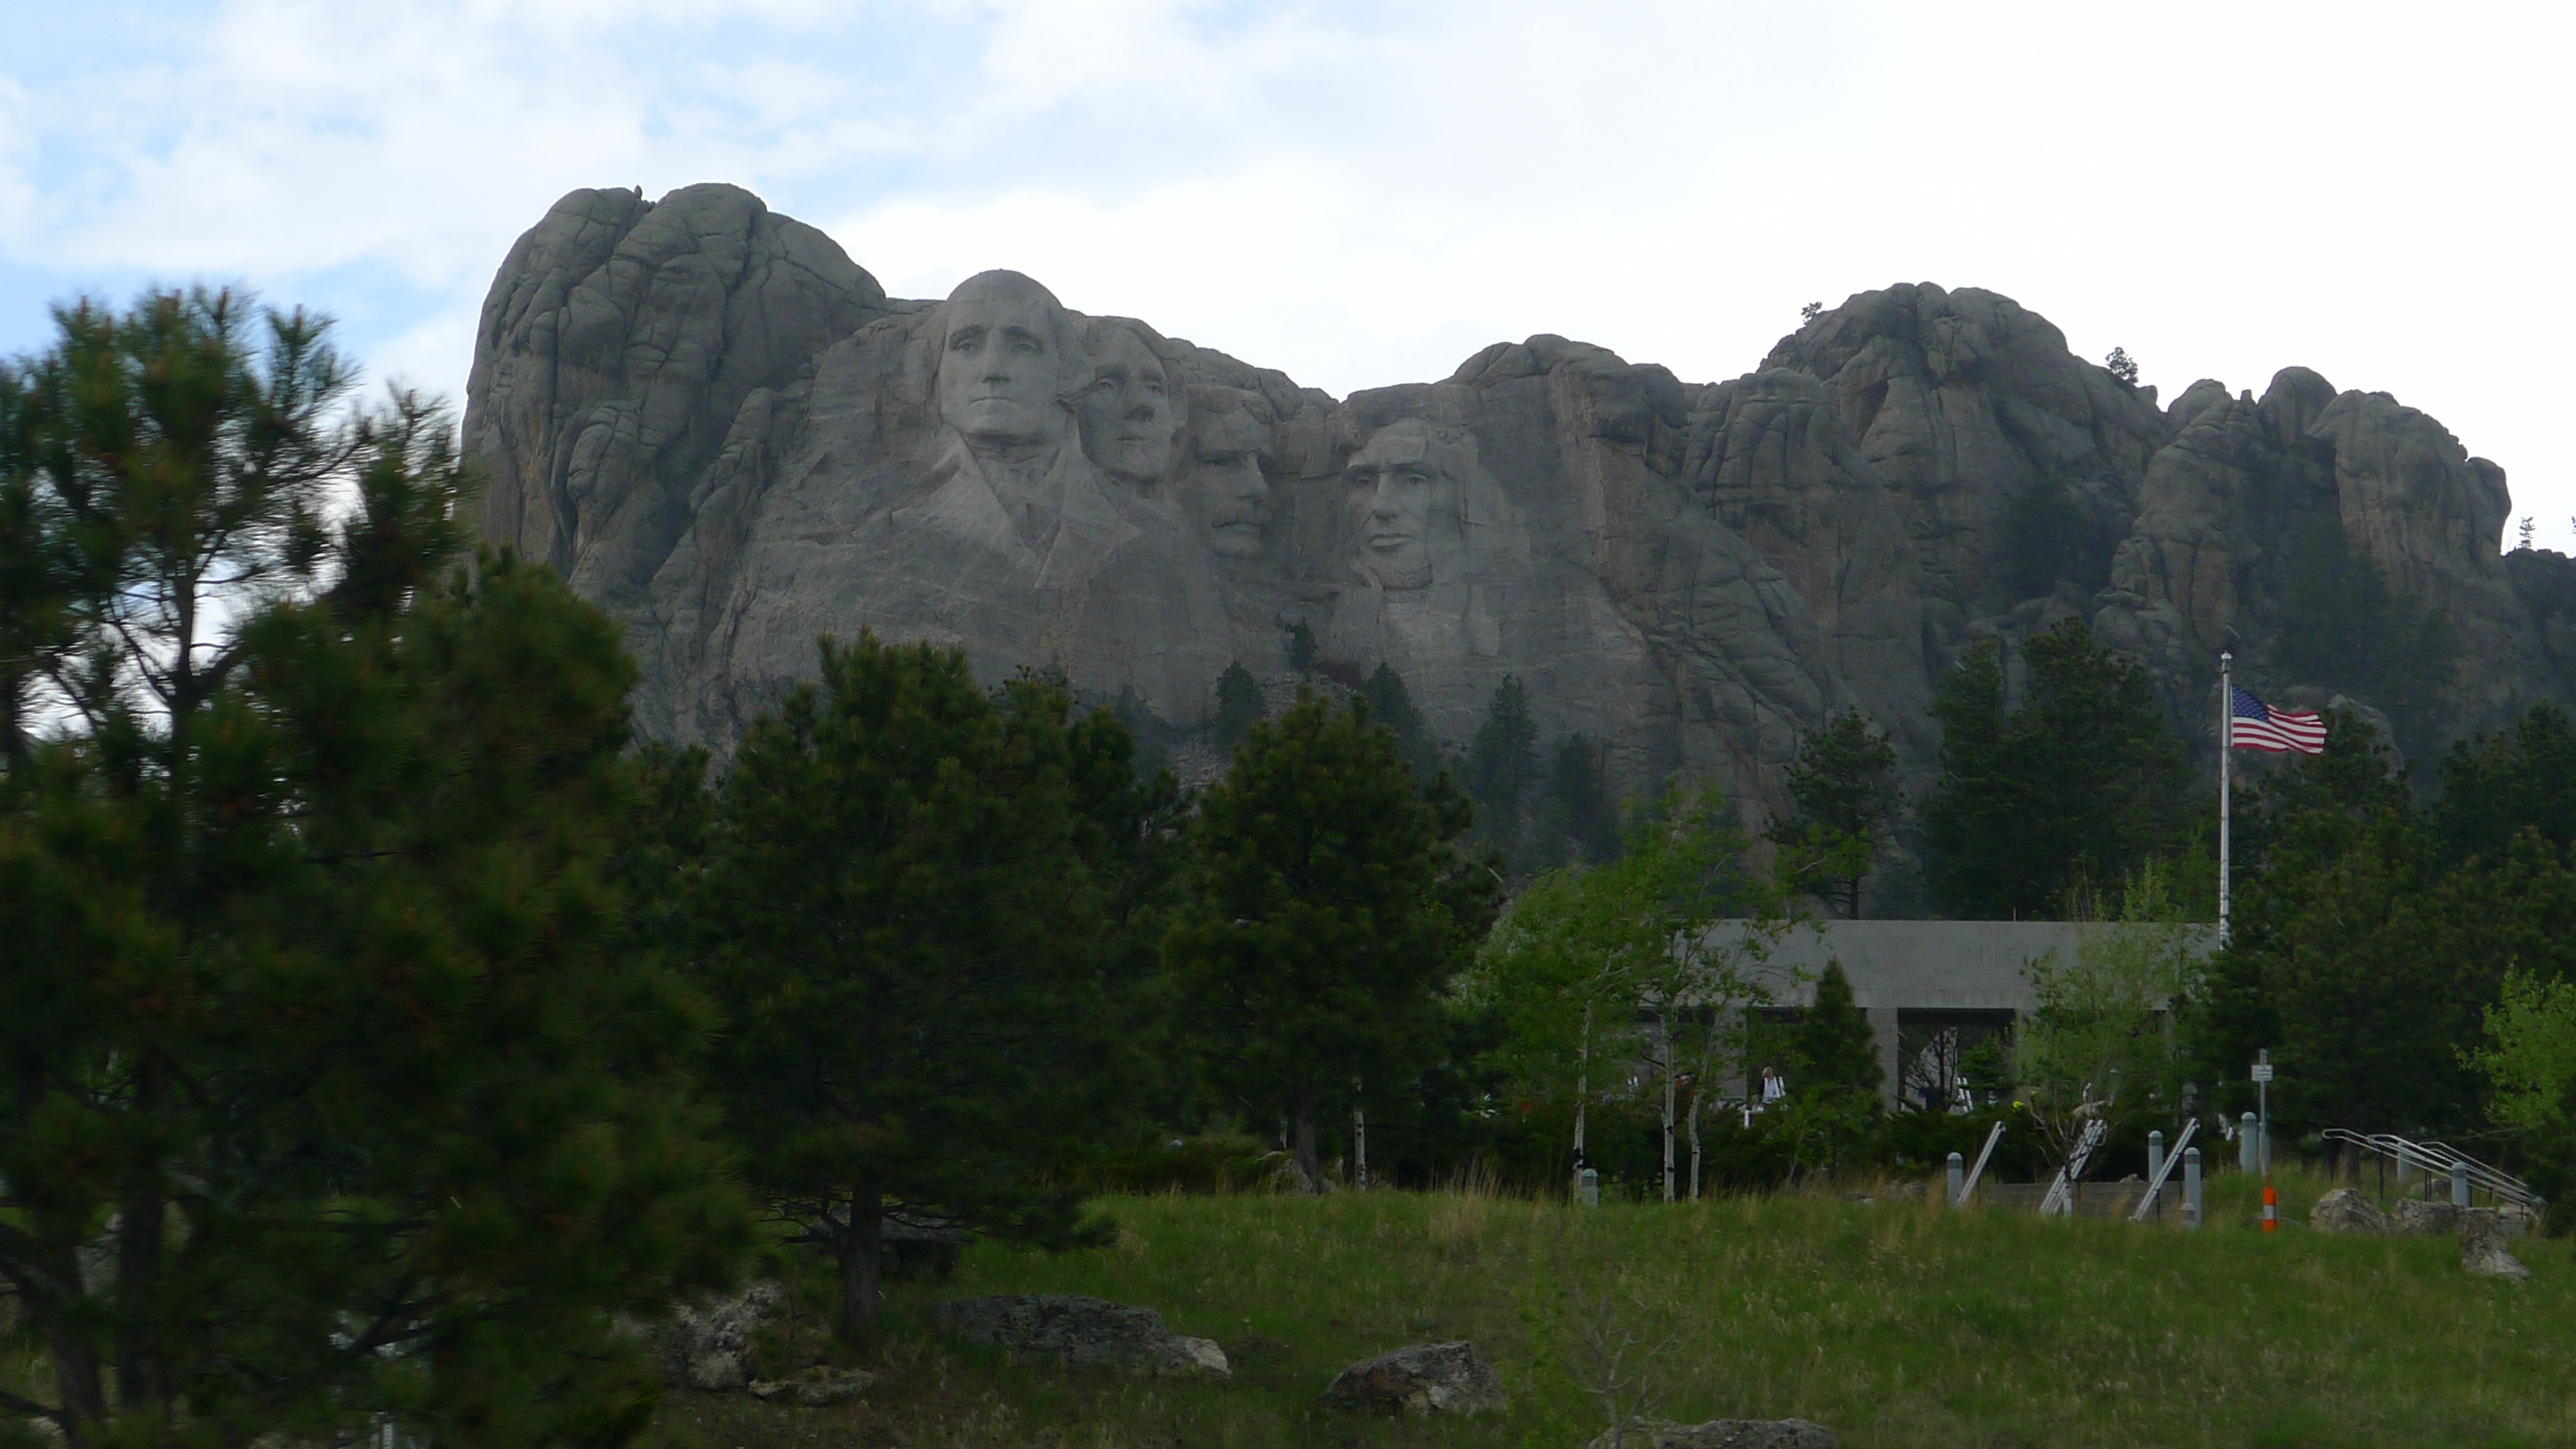 Mount Rushmore, 2015. Photo: D. G. Brosky. 